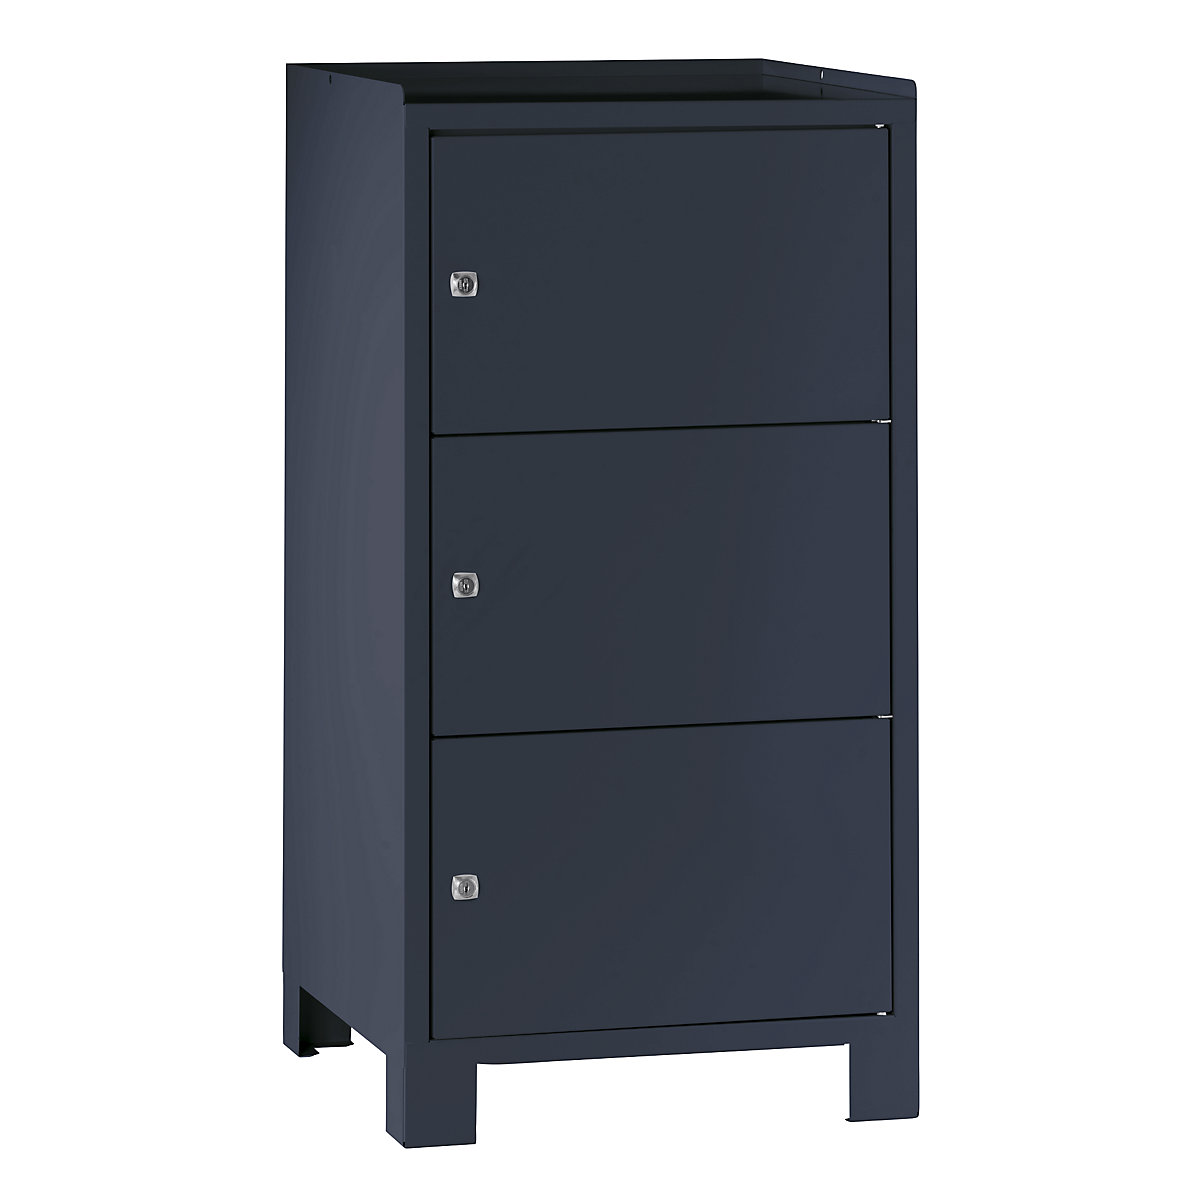 Tool cupboard with feet – Wolf, HxWxD 1000 x 500 x 500 mm, 3 lockable compartments, charcoal RAL 7016-11